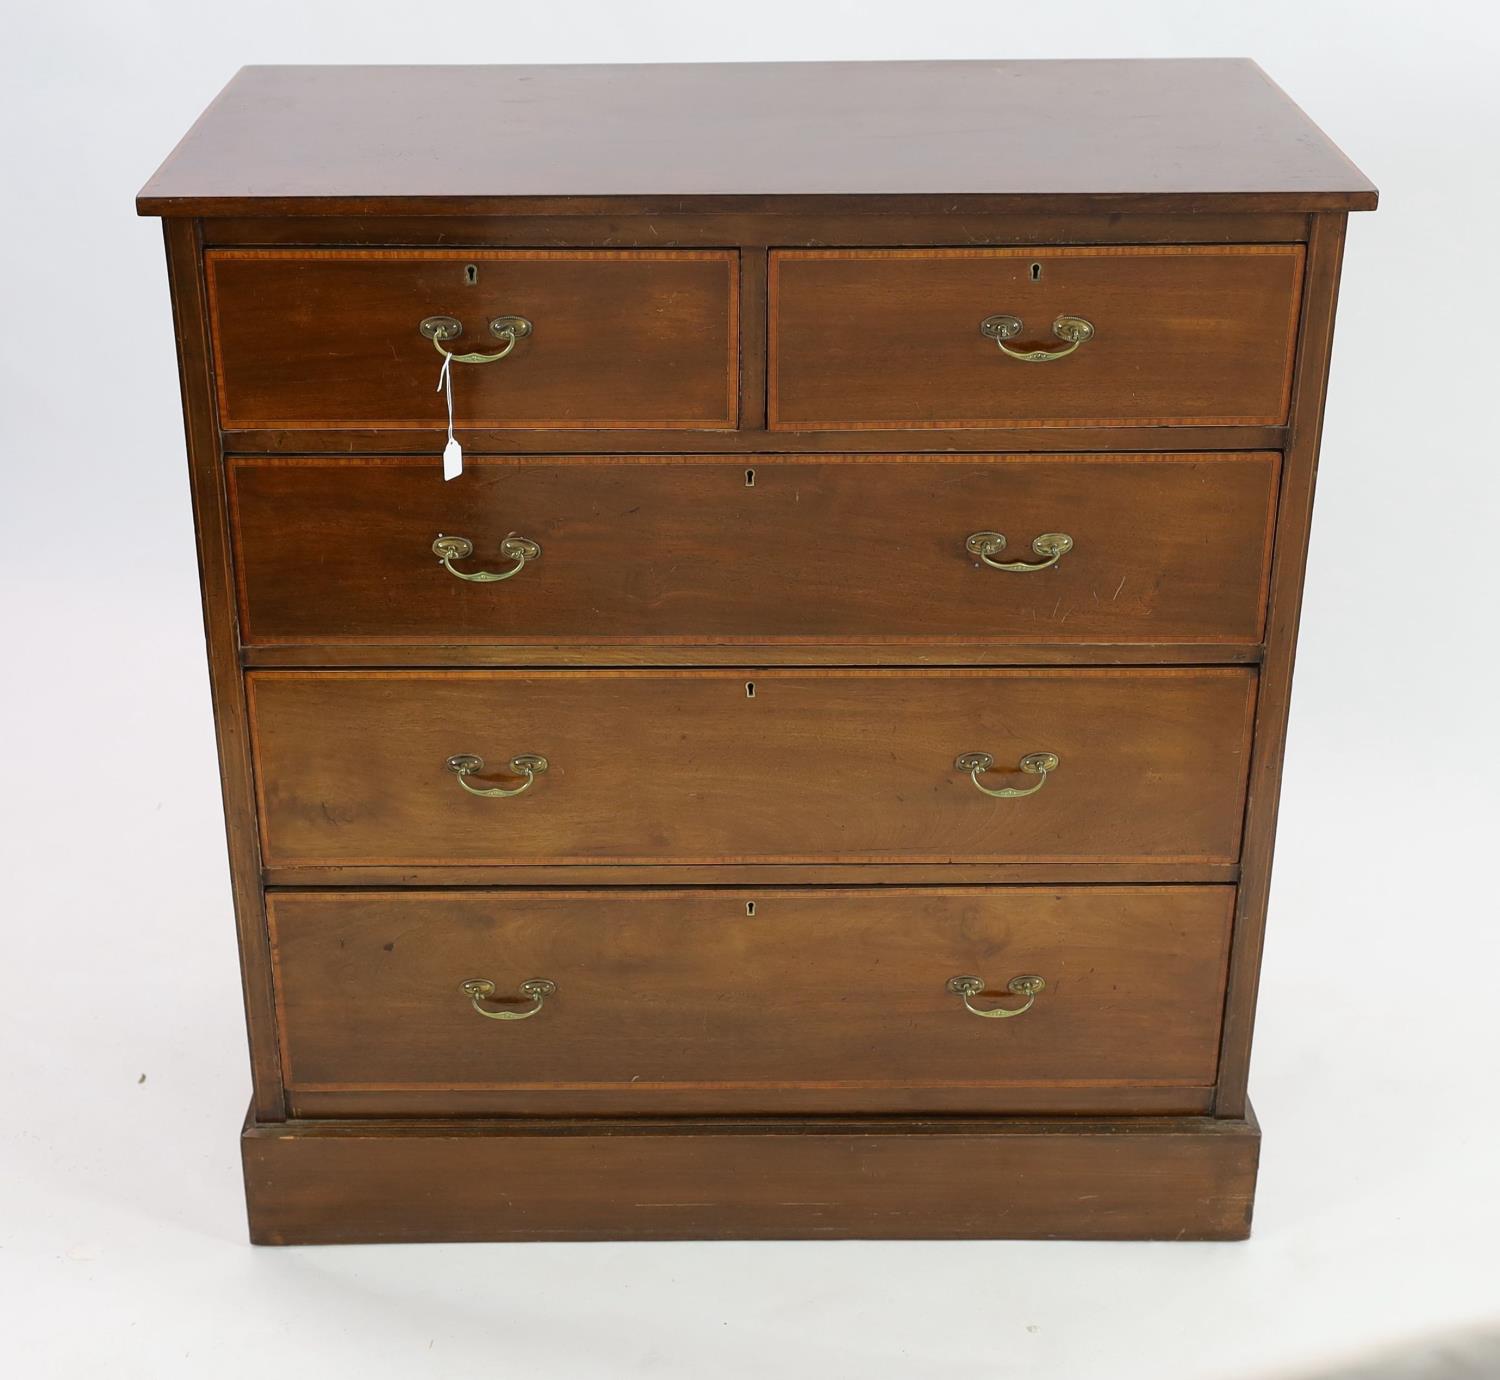 An Edwardian satinwood banded mahogany five drawer chest, width 107cm depth 54cm height 114cm - Image 2 of 2